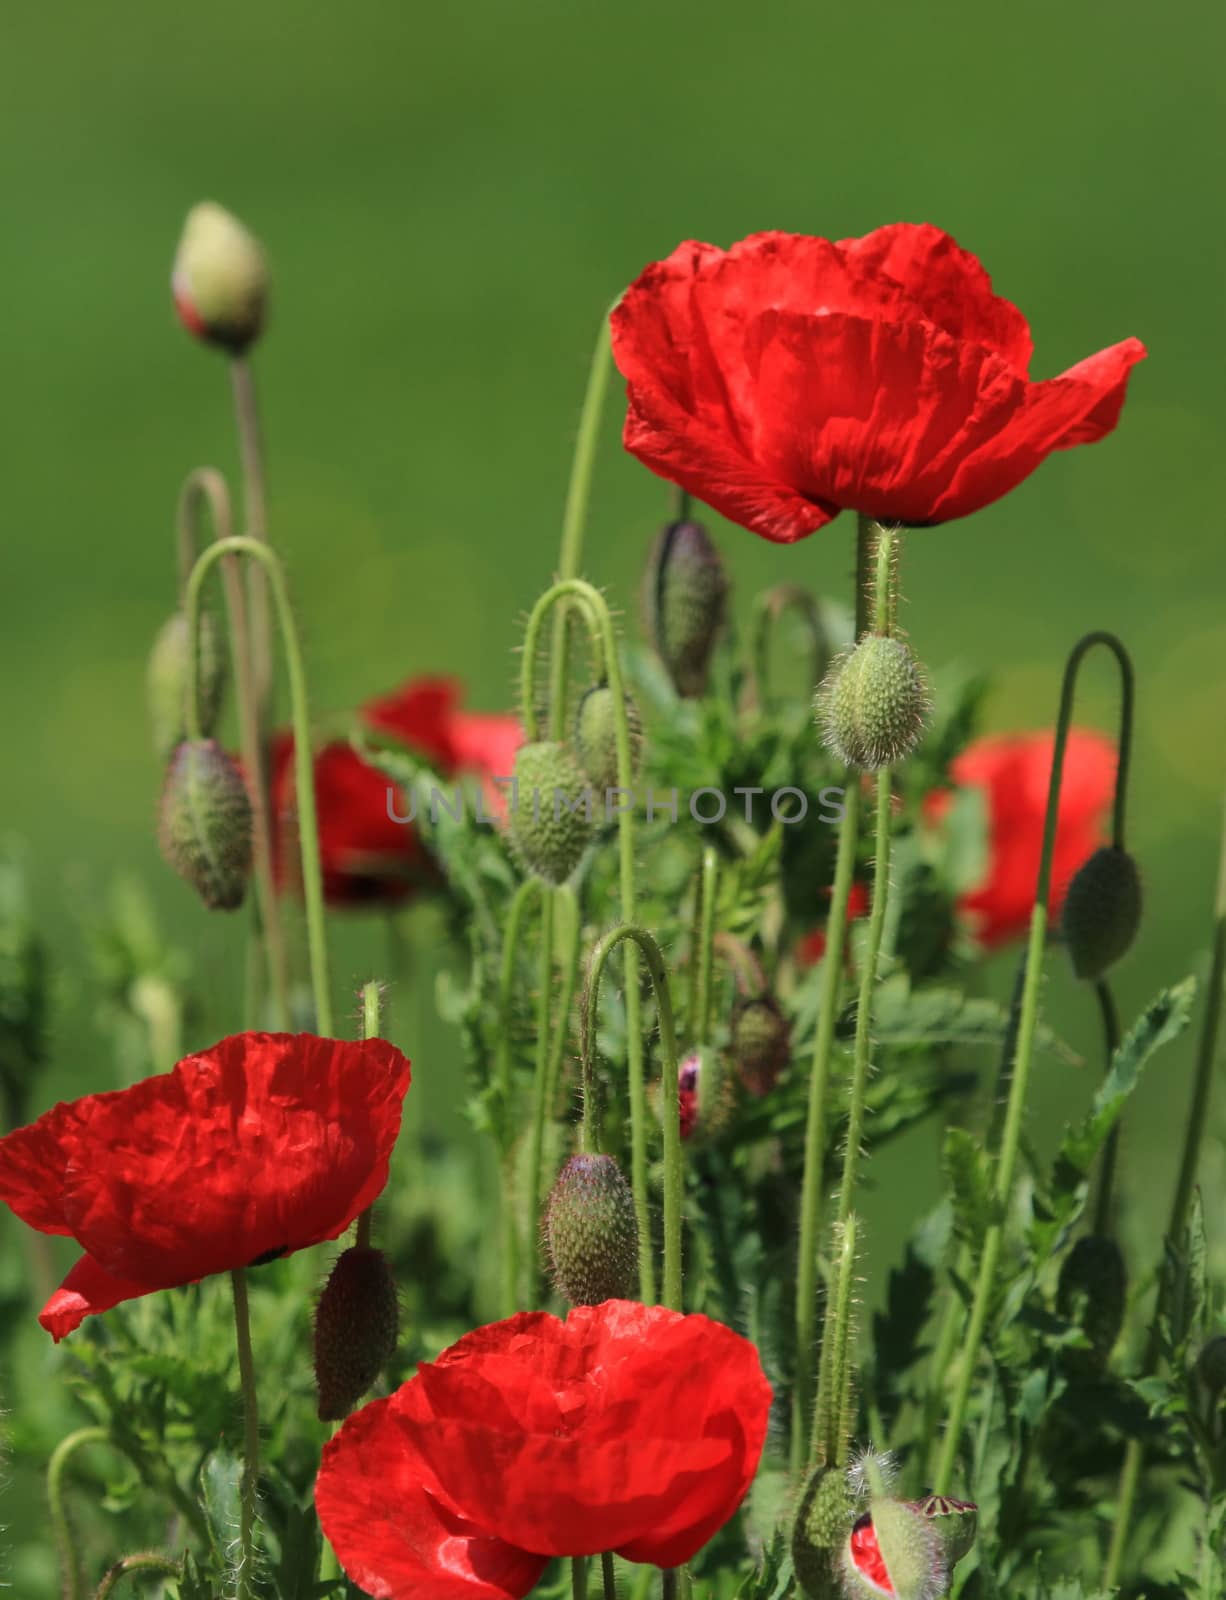 Poppies in nature by Elenaphotos21